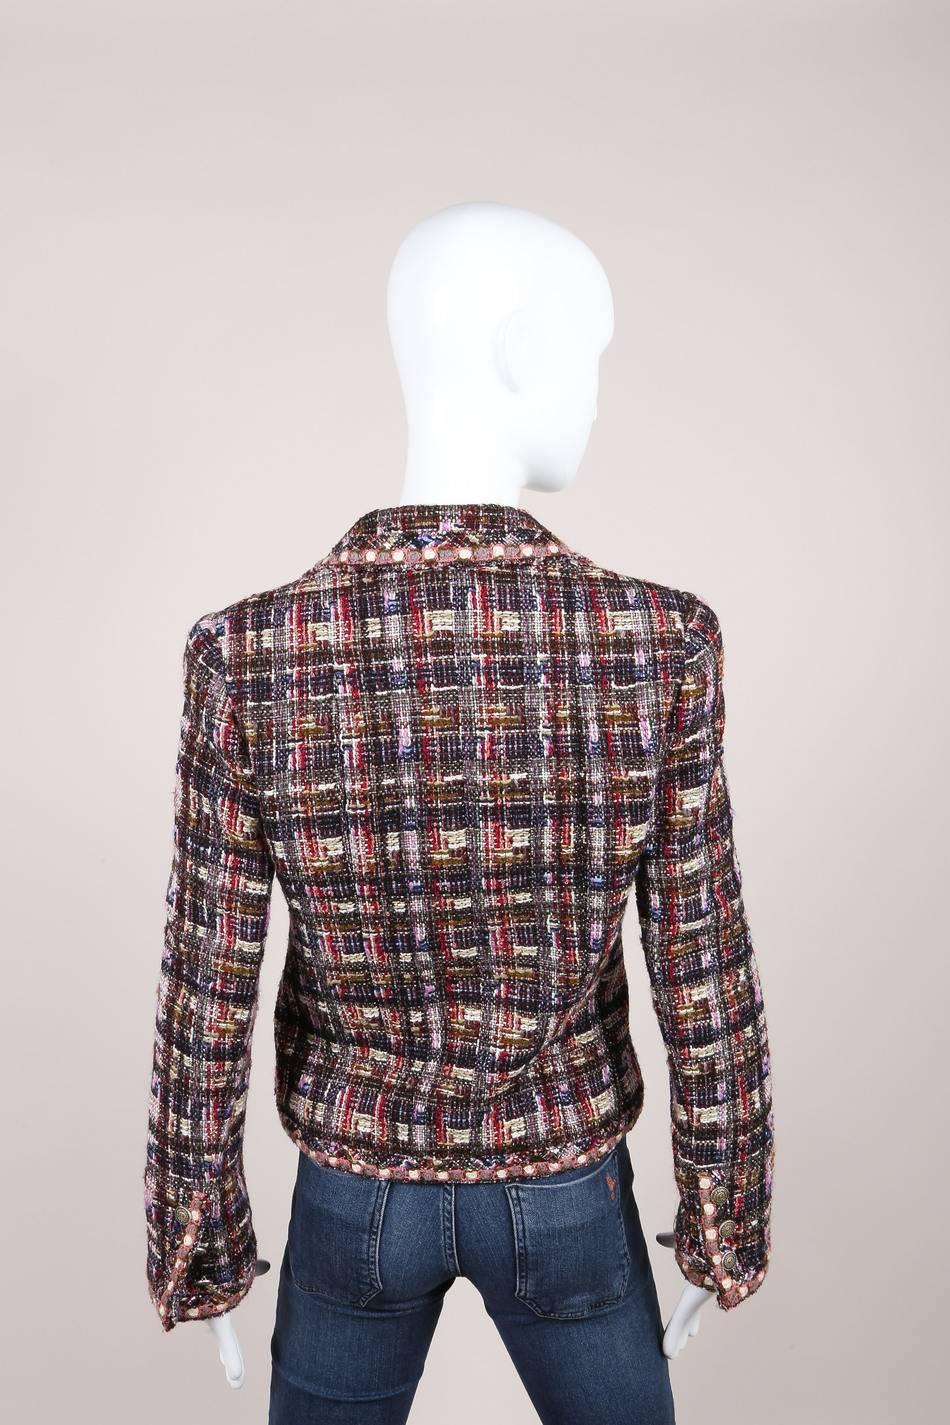 From the 2005 Fall collection. Fitted, tailored-cut blazer jacket. Constructed of signature Chanel tweed knit in multicolor checkered pattern. Notch collar. Long sleeves with button fastening. Front button fastening . Buttons features silver-tone